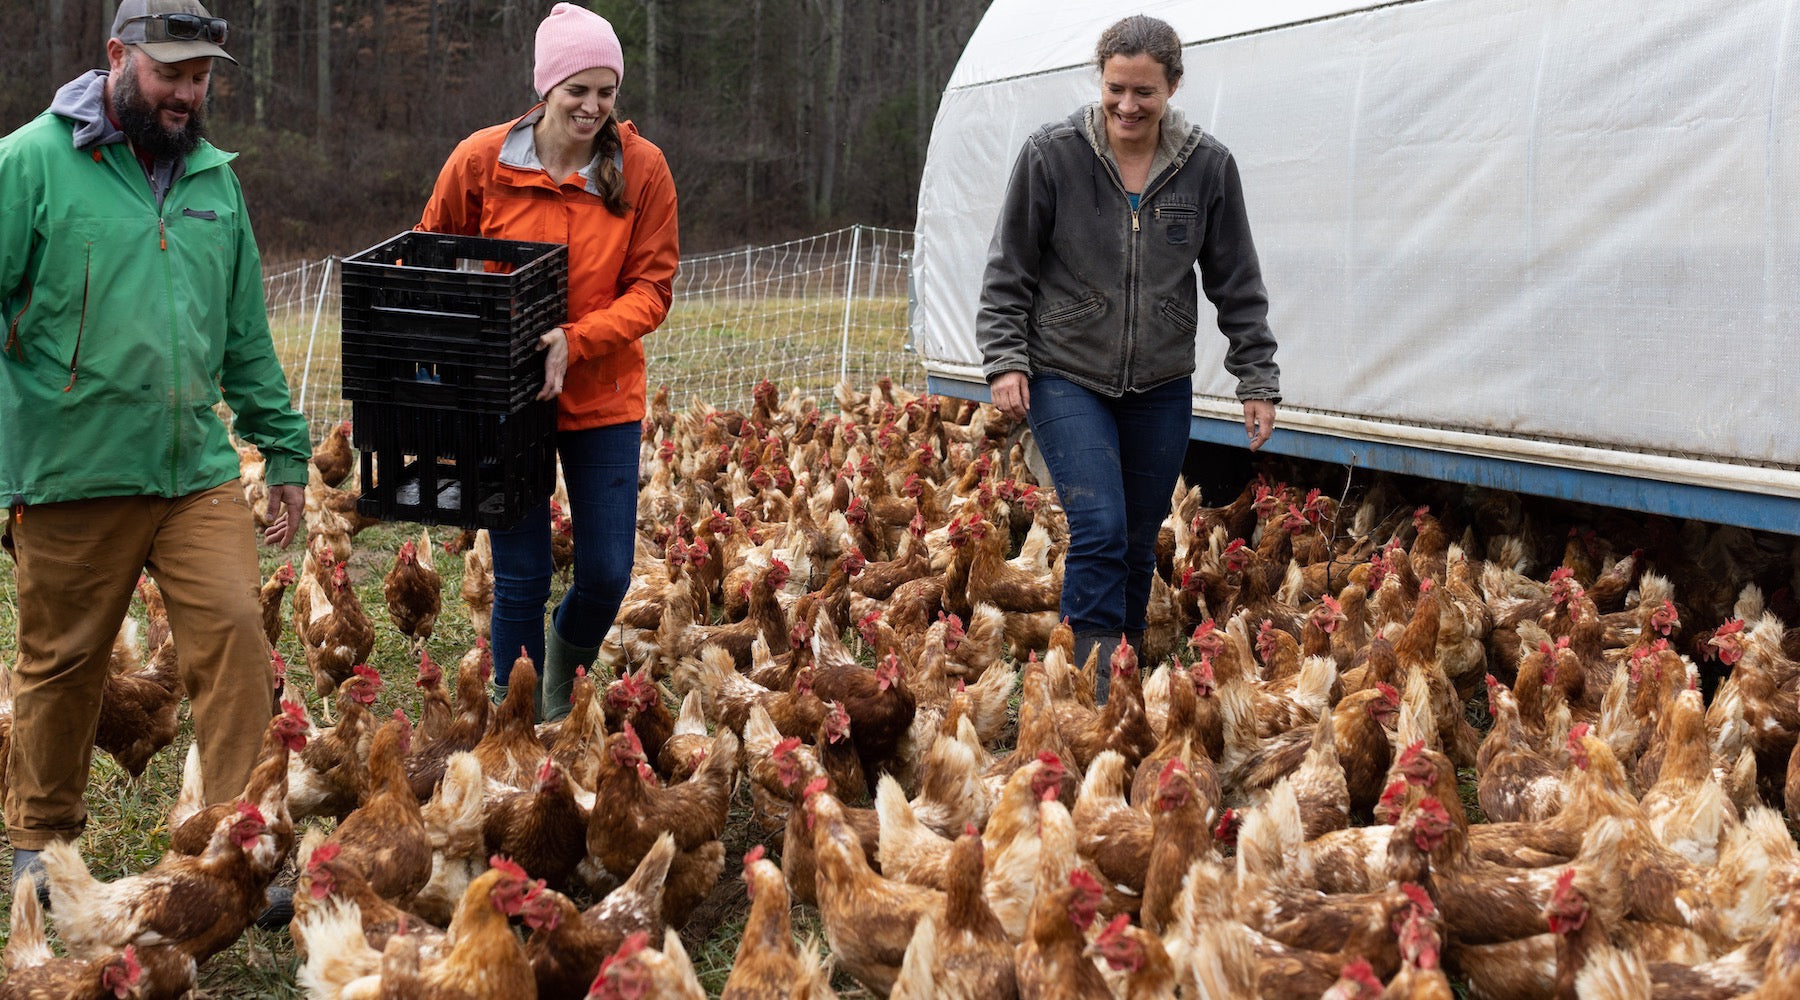 Appalachia’s Best Eggs? Celebrity Chef Katie Button visits her favorite egg farm.